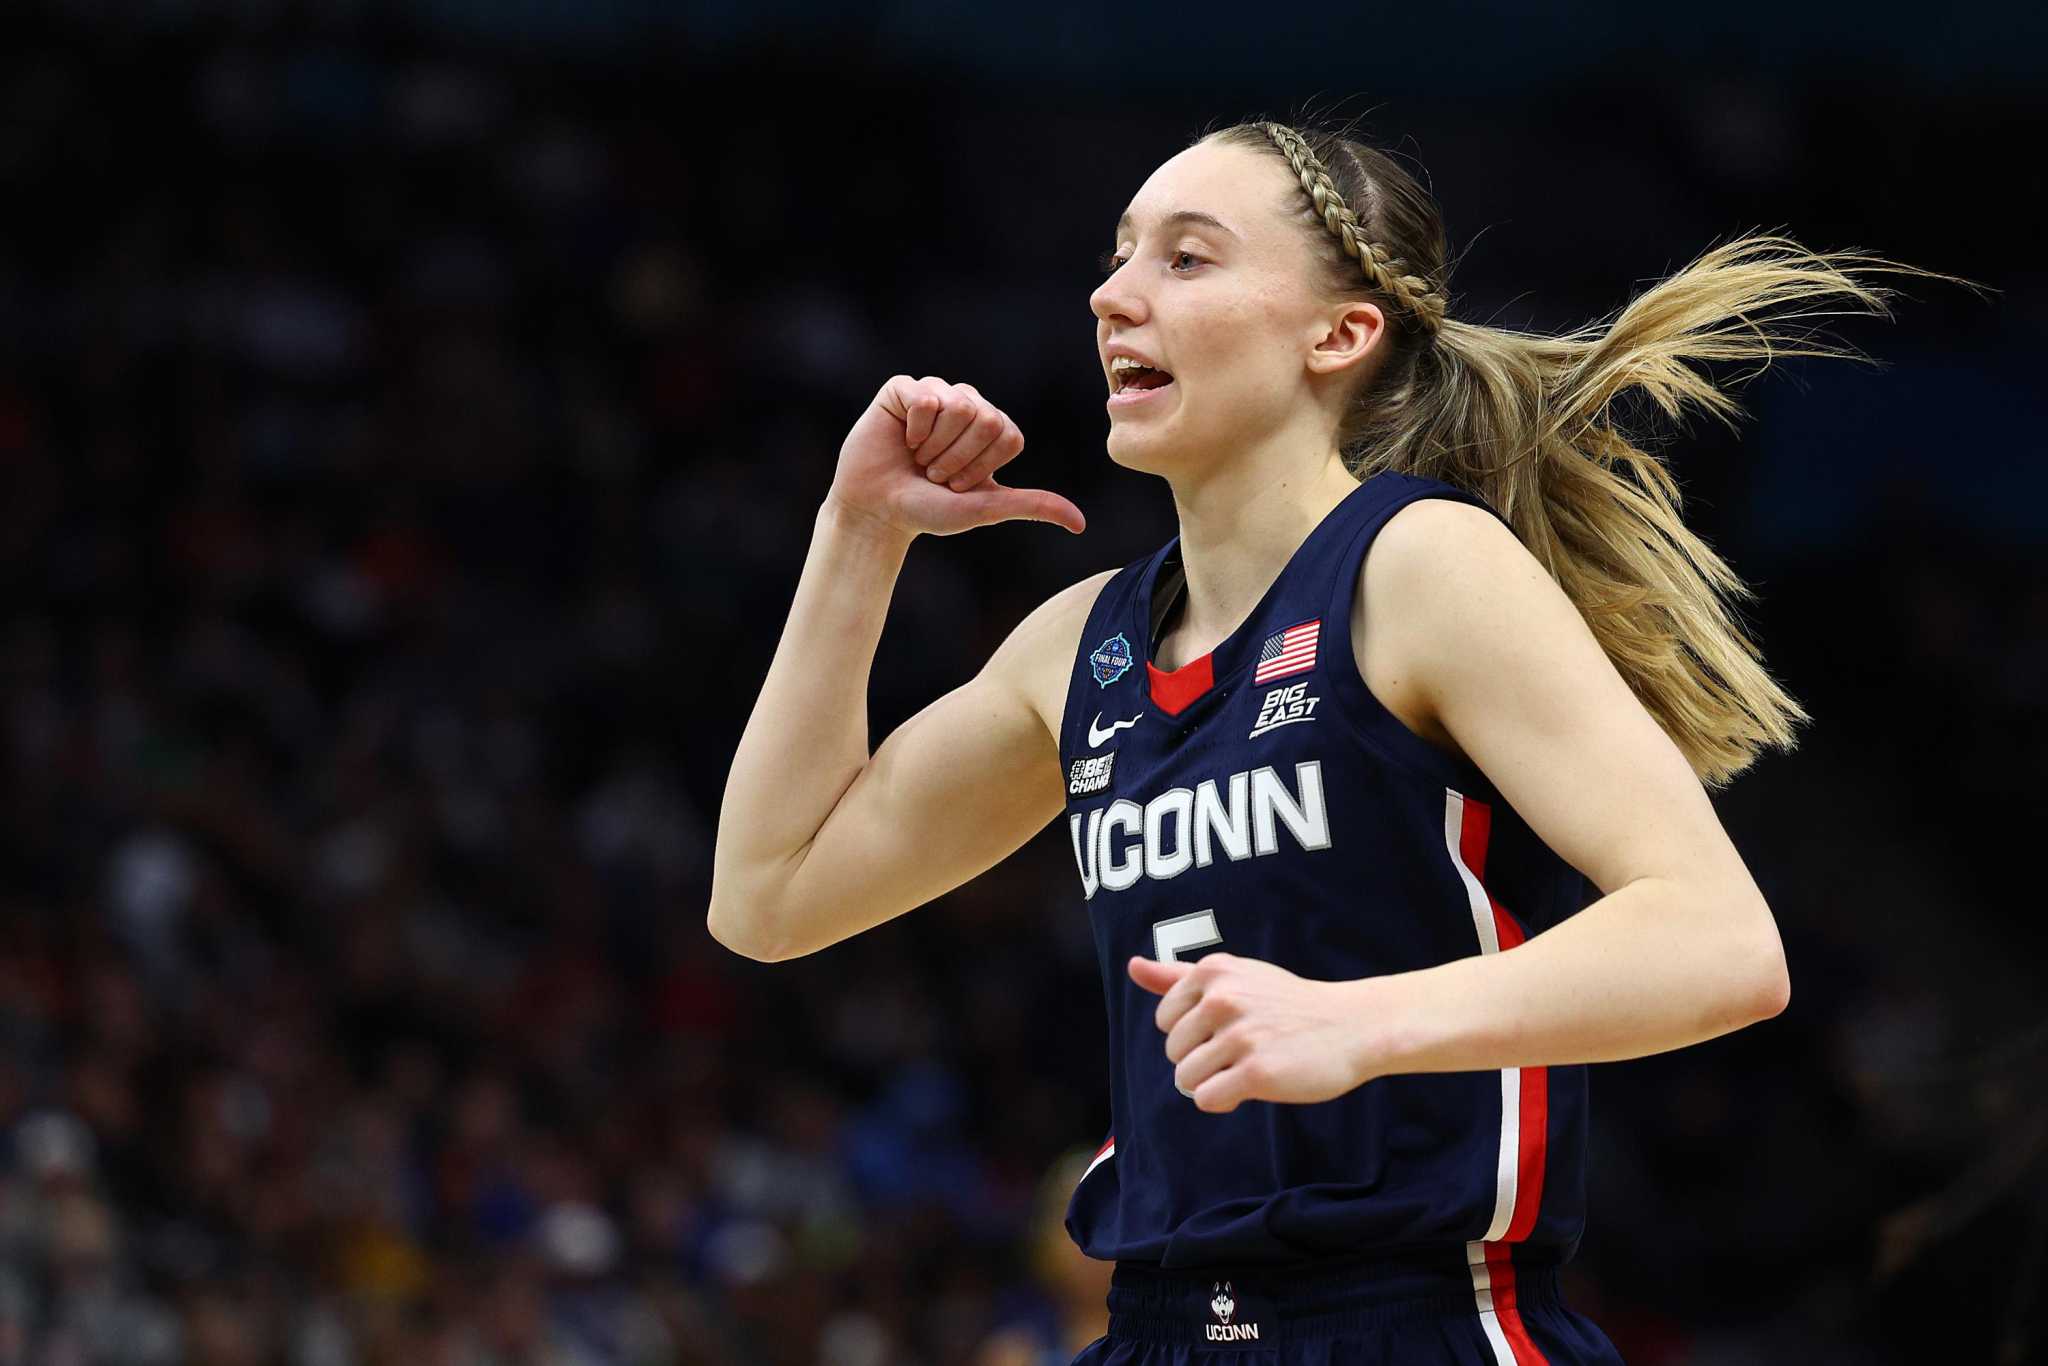 UConn Women's Basketball Star Paige Bueckers Ranked In On3's Top 100